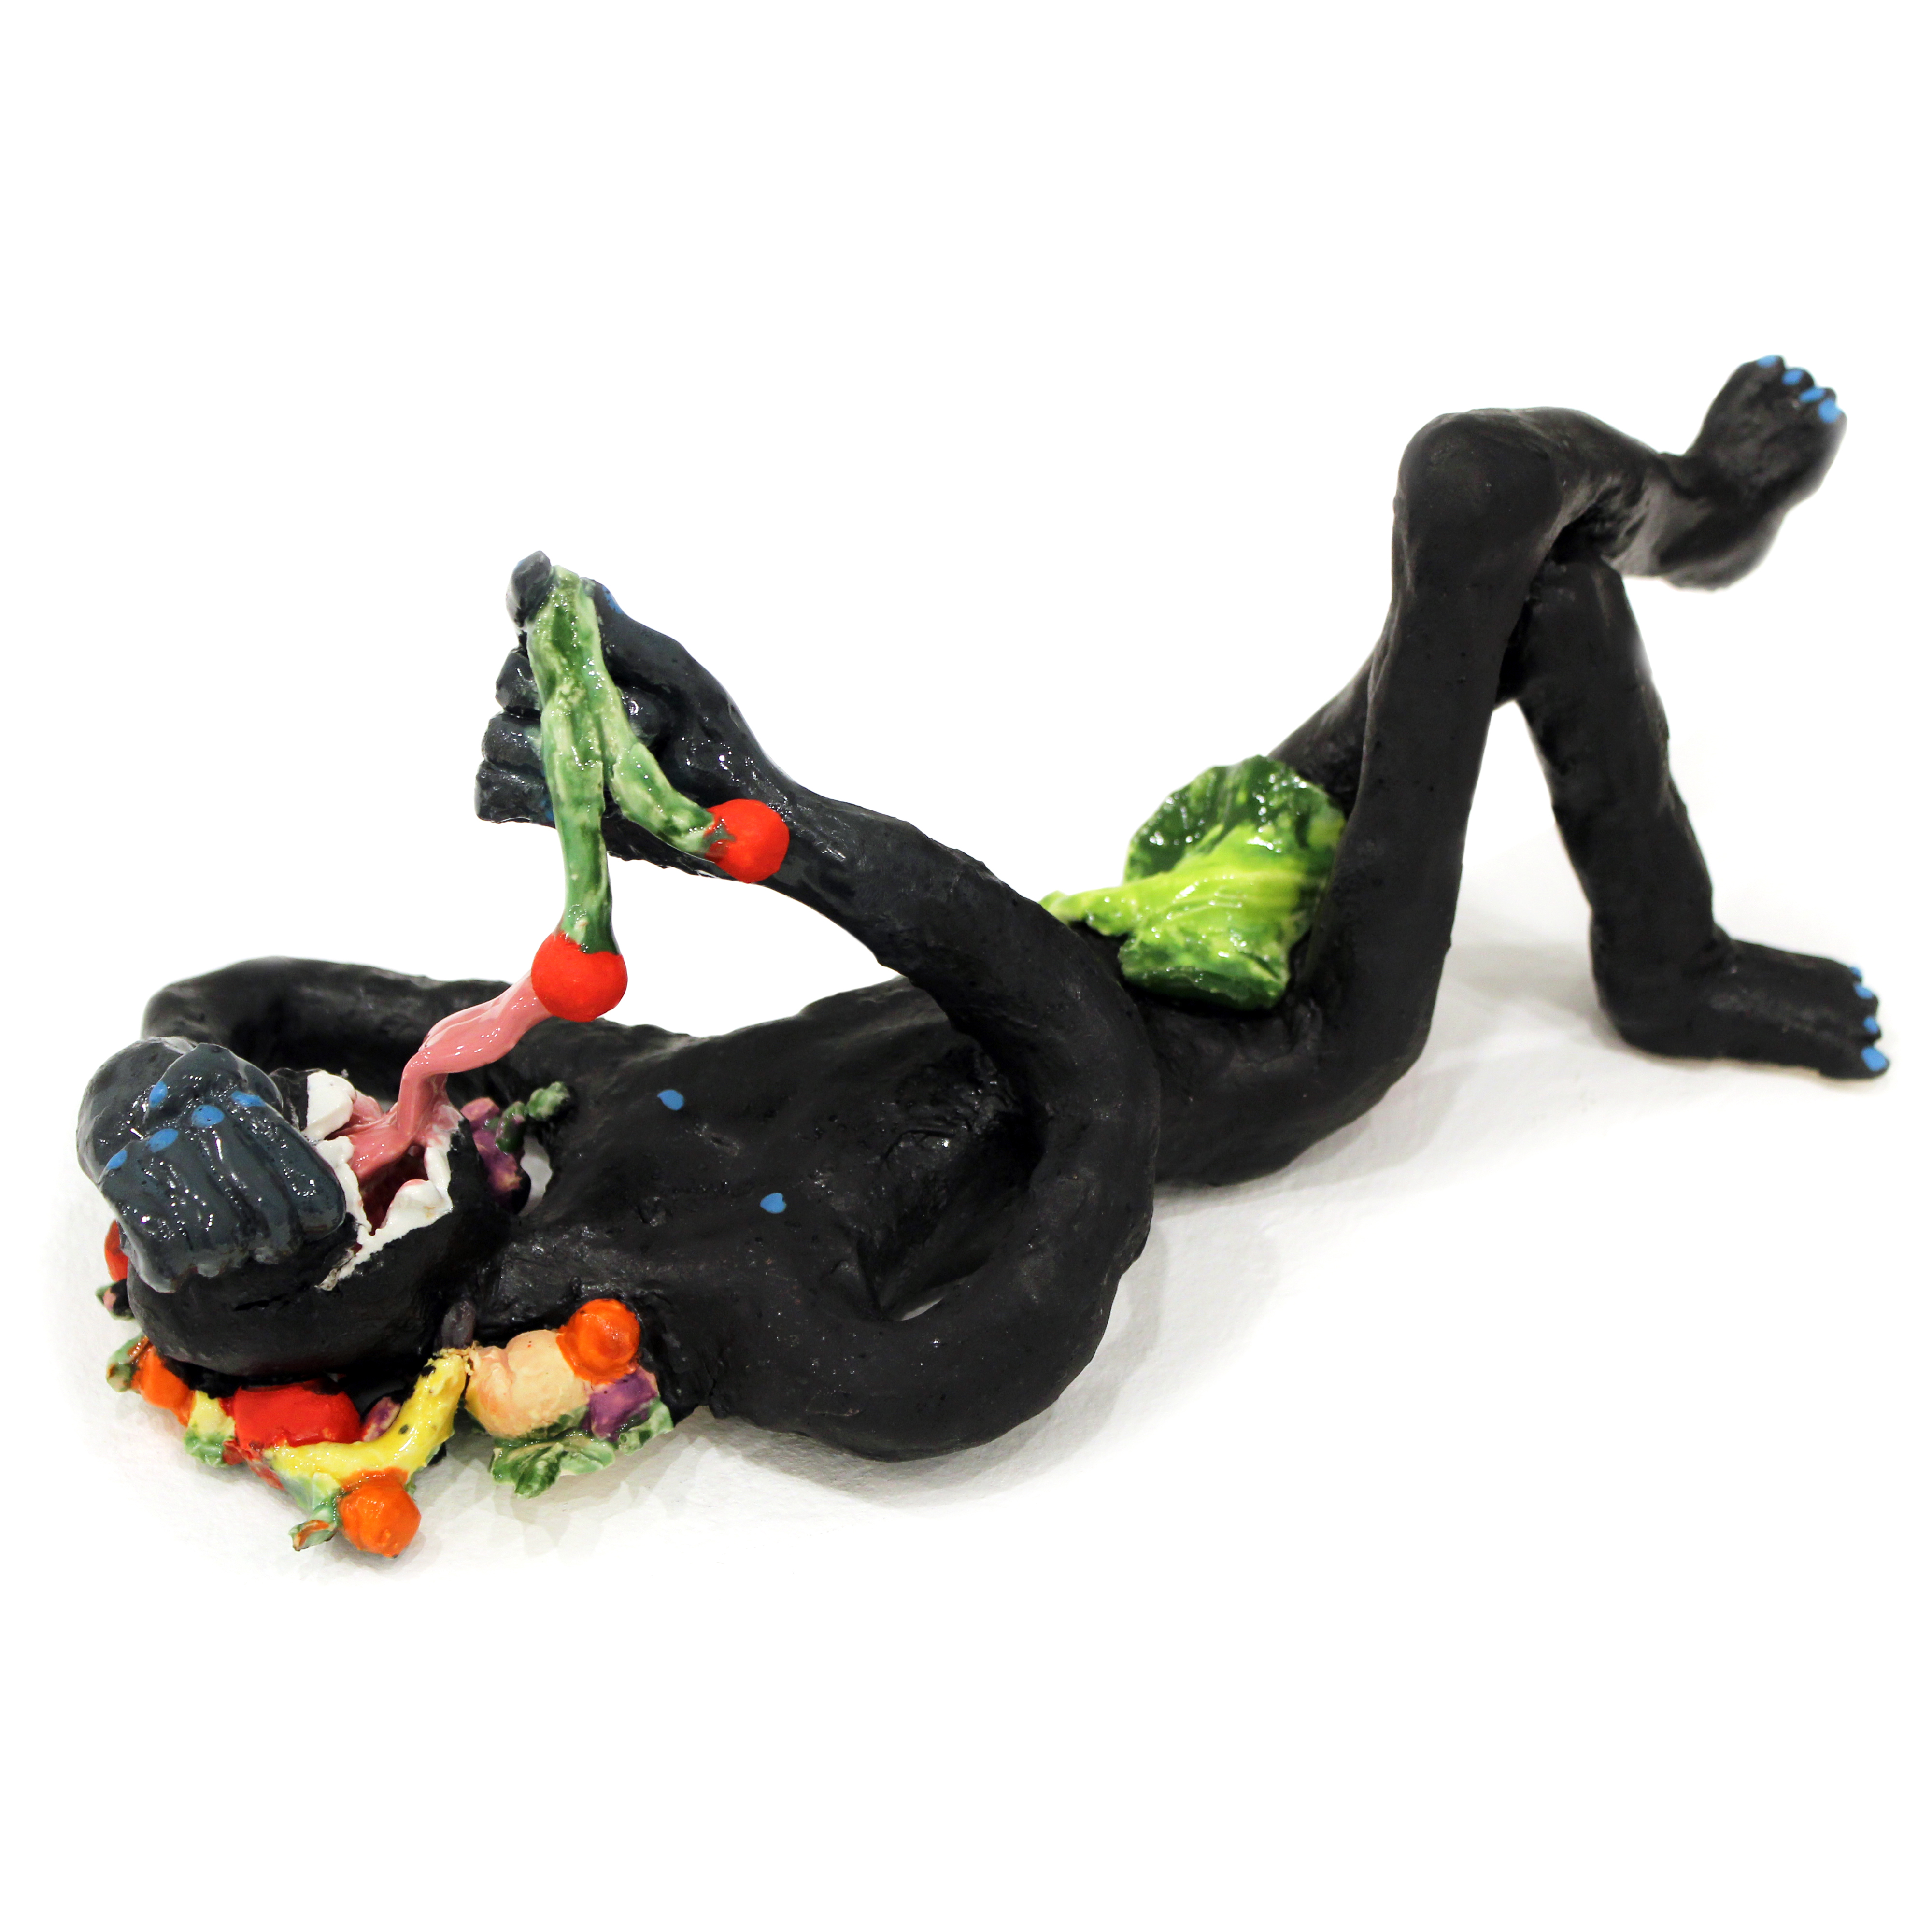 Colin Radcliffe Fruity, 2019, ceramic, 6 x 6 x 3 inches